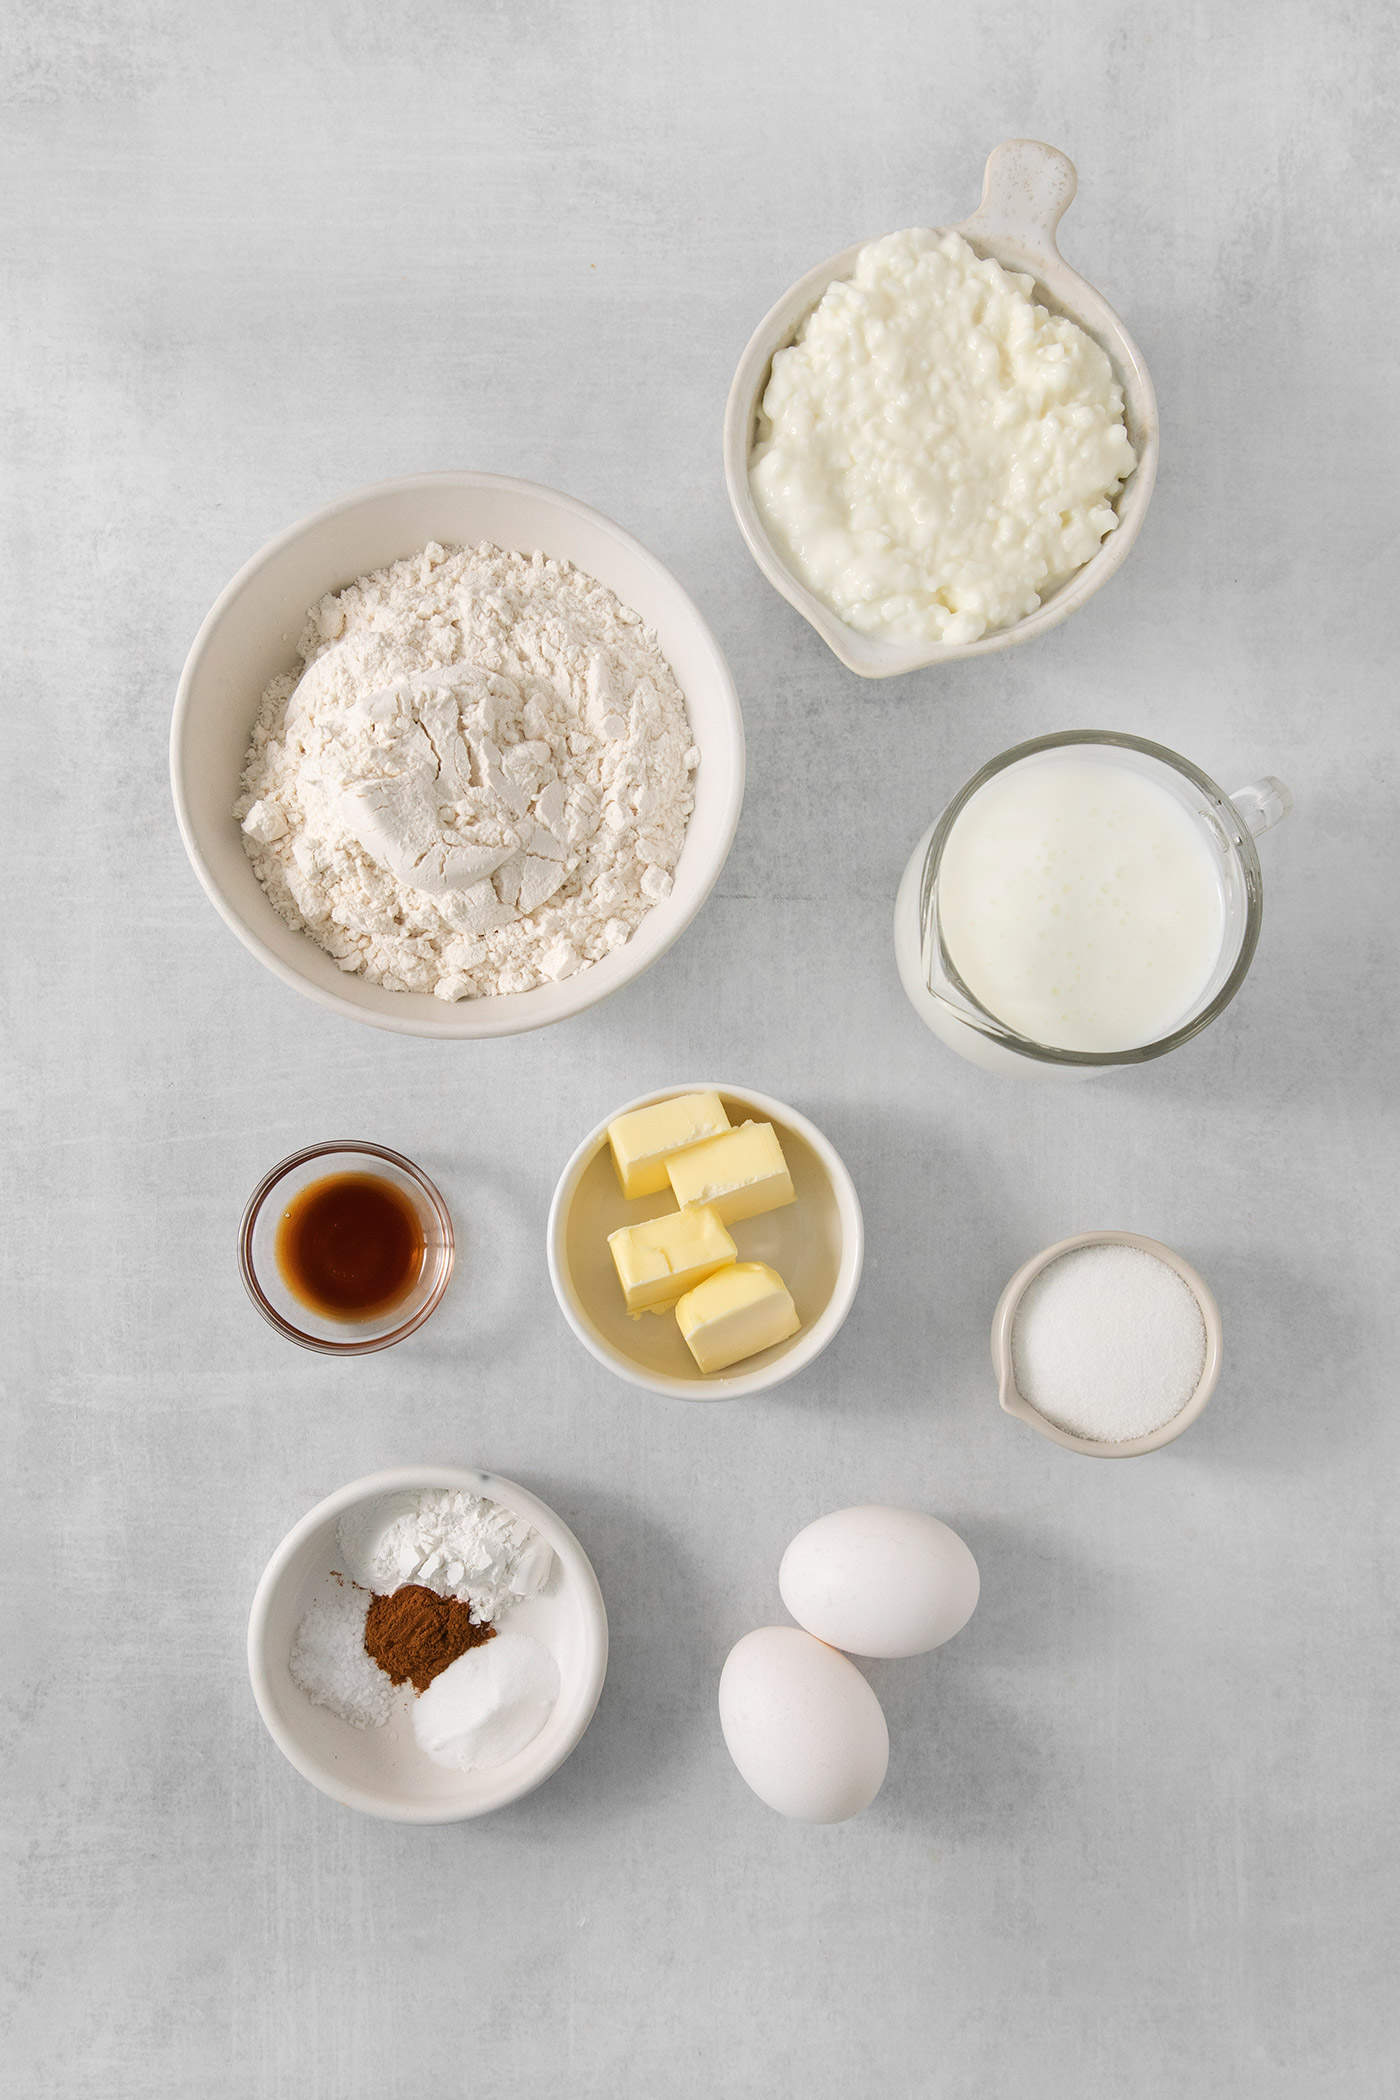 The ingredients for cottage cheese pancakes are shown portioned out: flour, sugar, eggs, buttermilk, cottage cheese, baking powder and baking soda, salt, vanilla, and cinnamon.